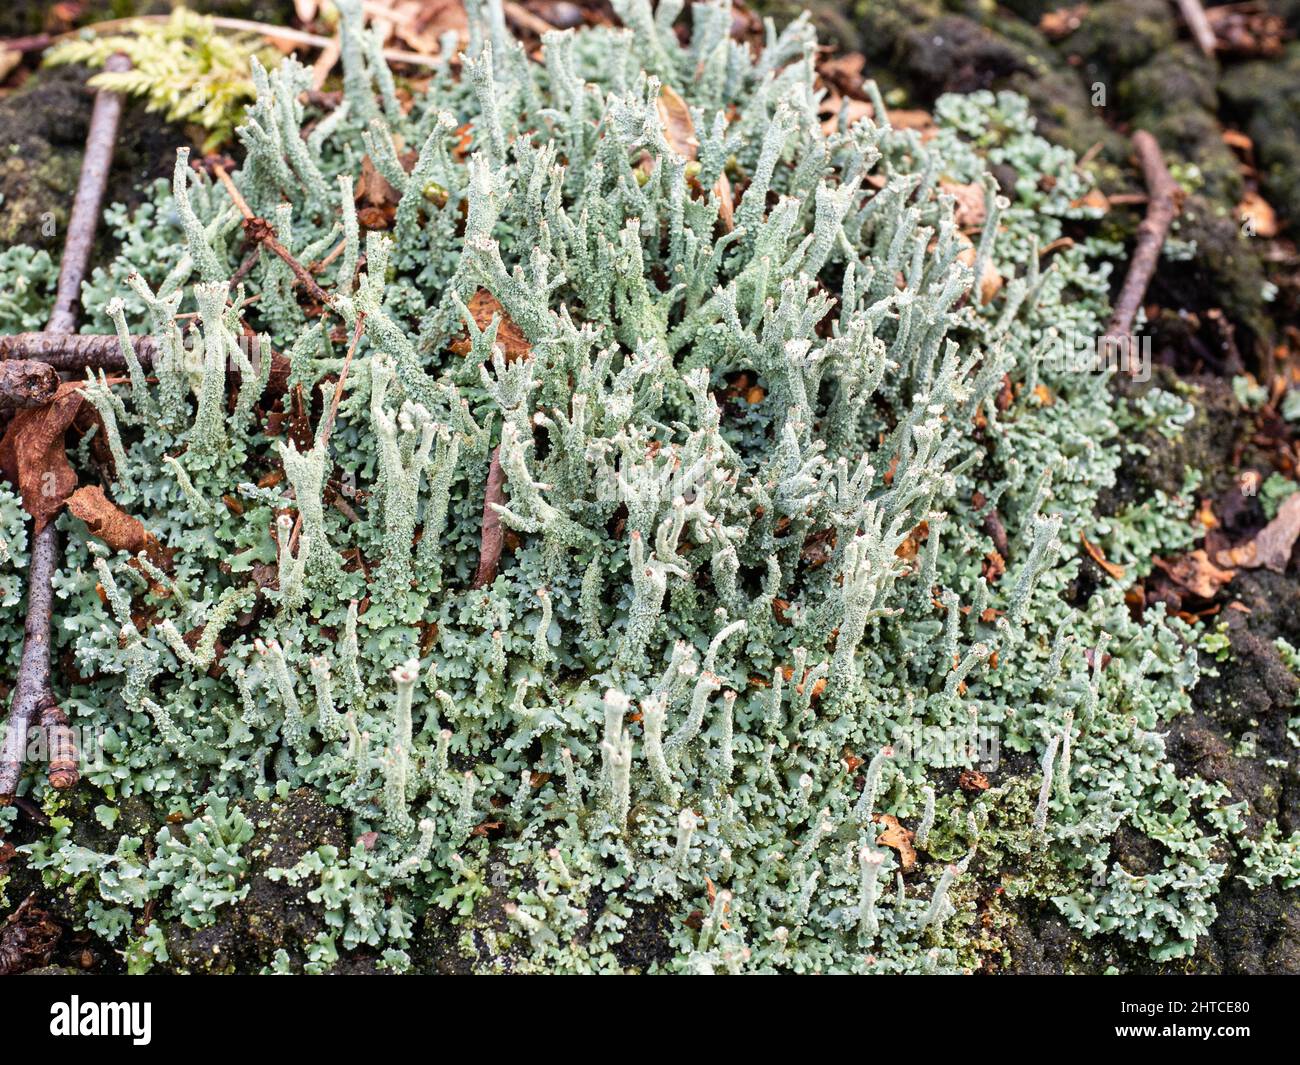 A close up of a patch of the grey lichen Cladonia macilenta growing on a woodland floor. Stock Photo